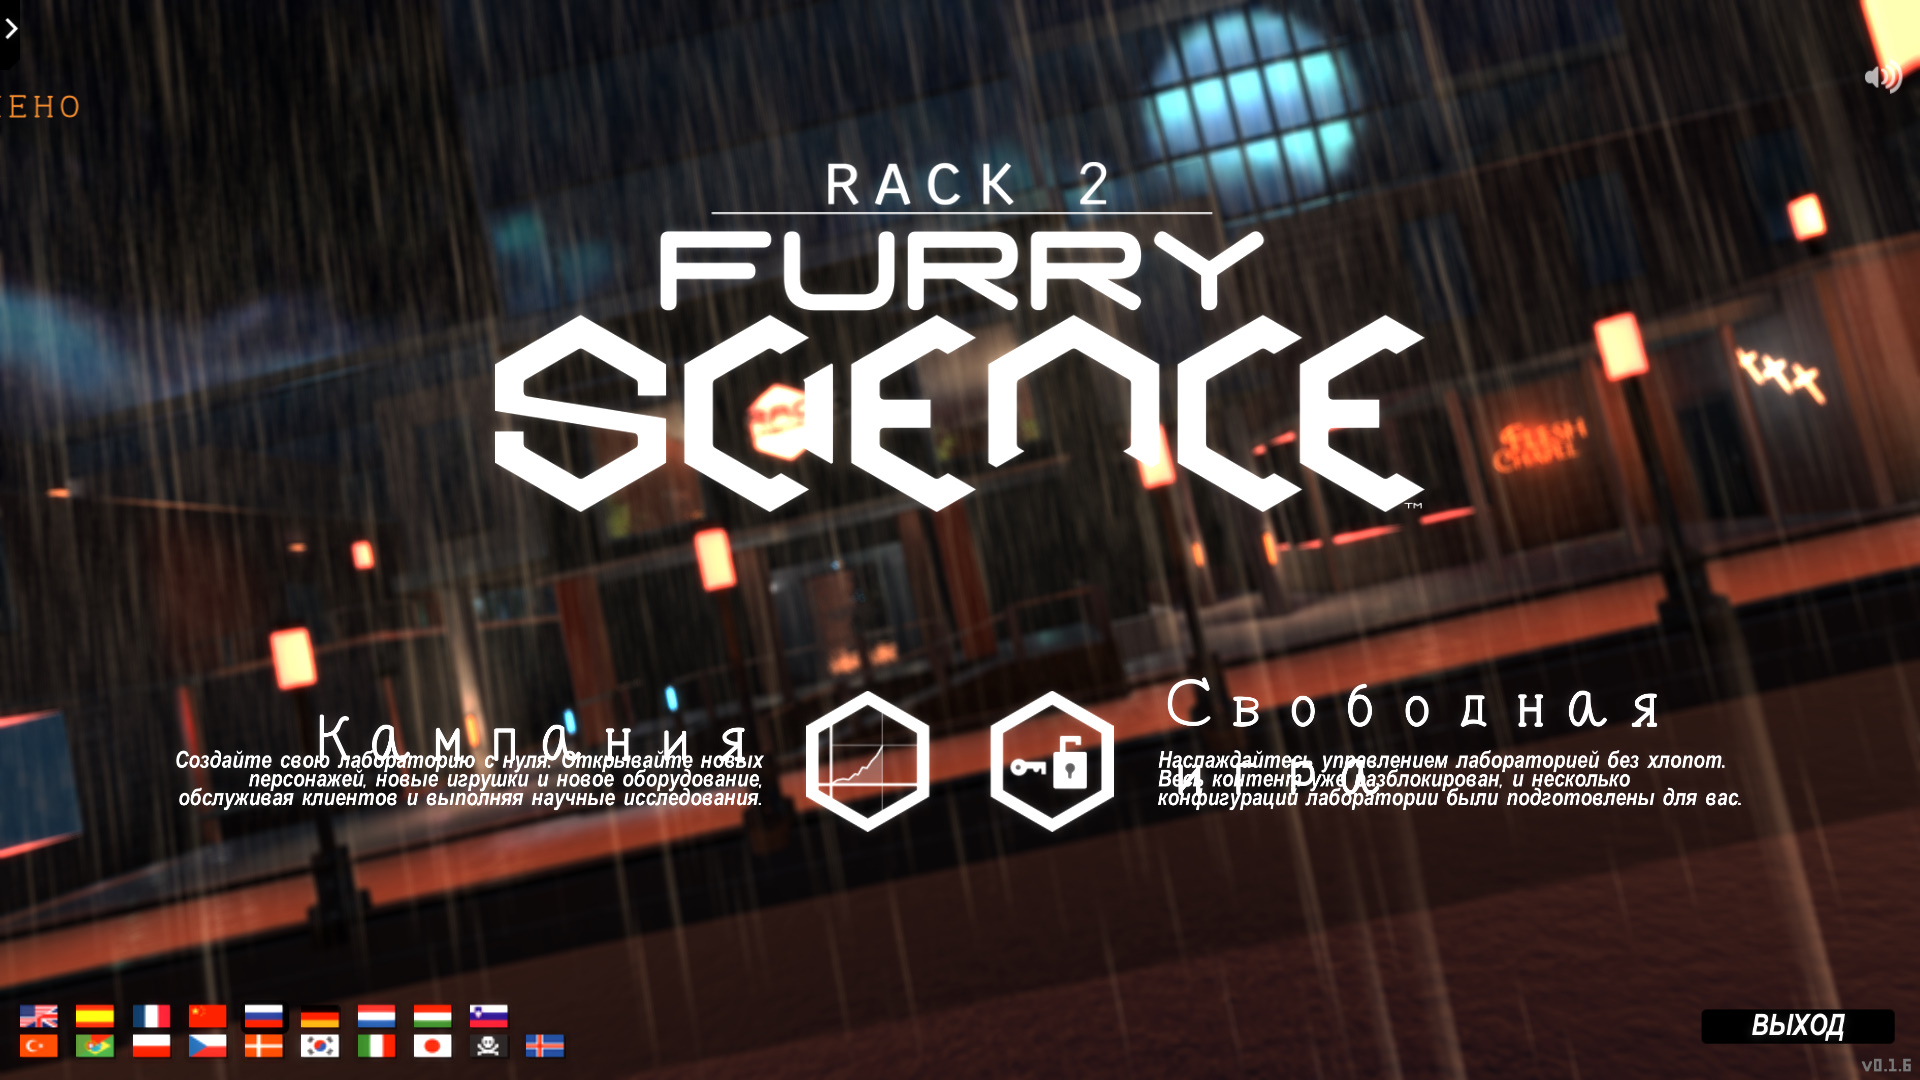 Furry Science Rack 2 Free Download Game.